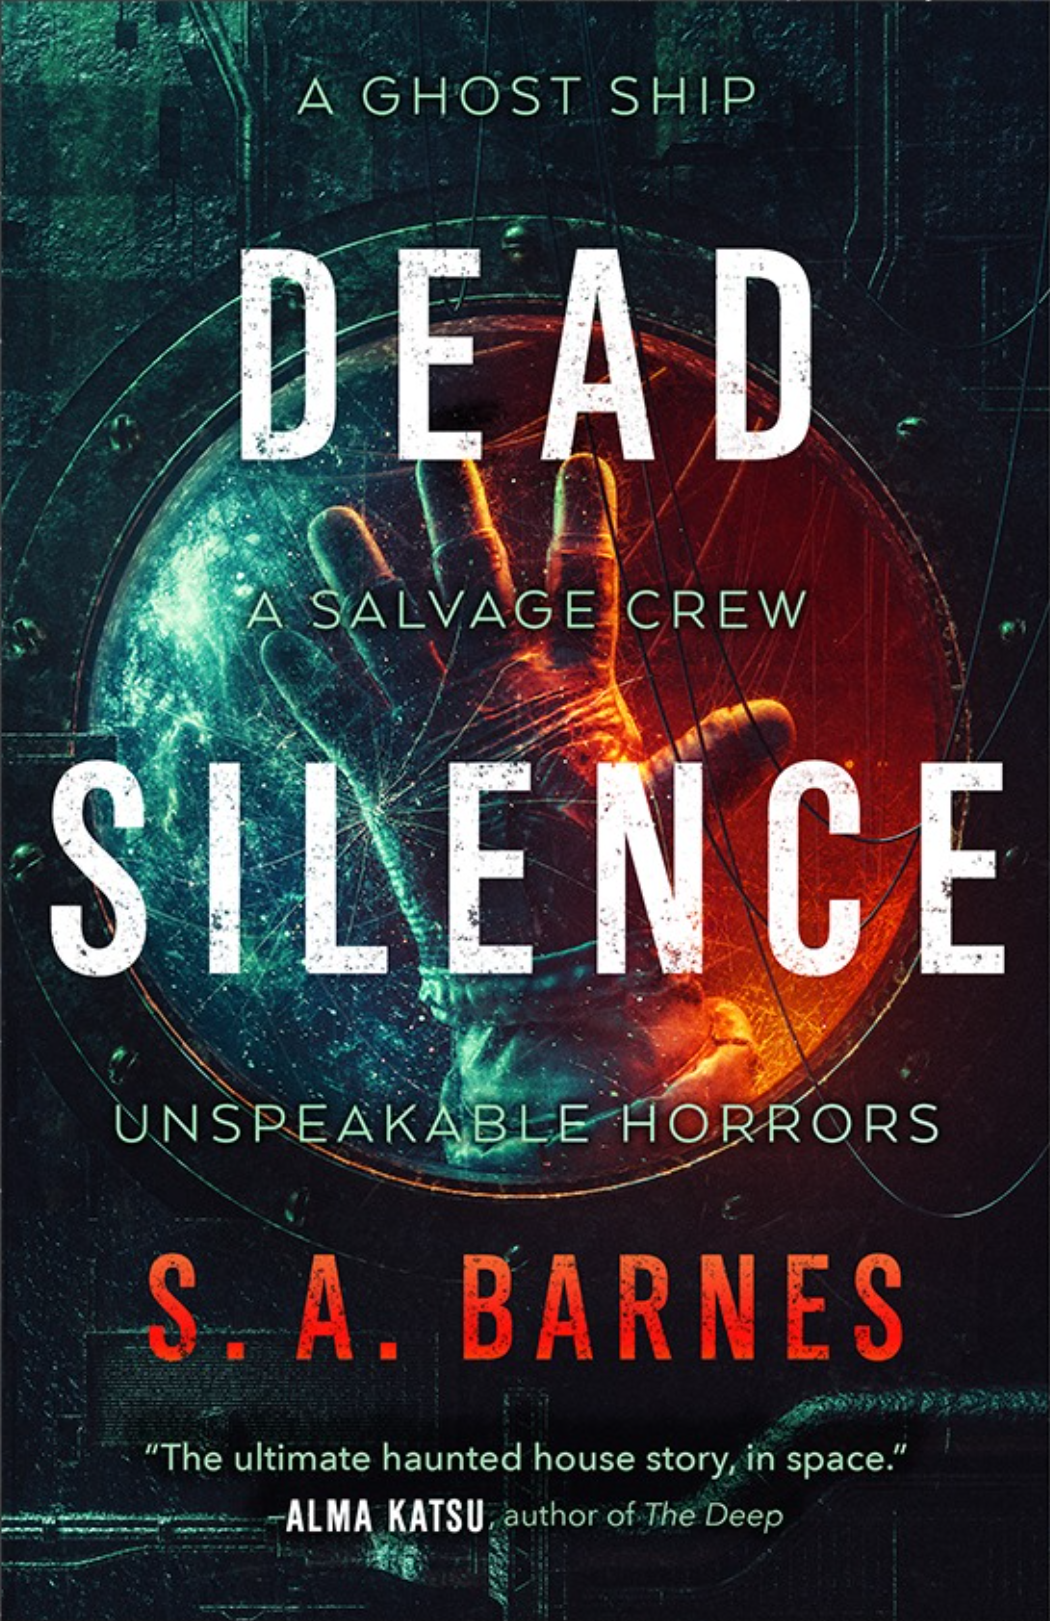 Dead Silence by S.A. Barnes PDF Download